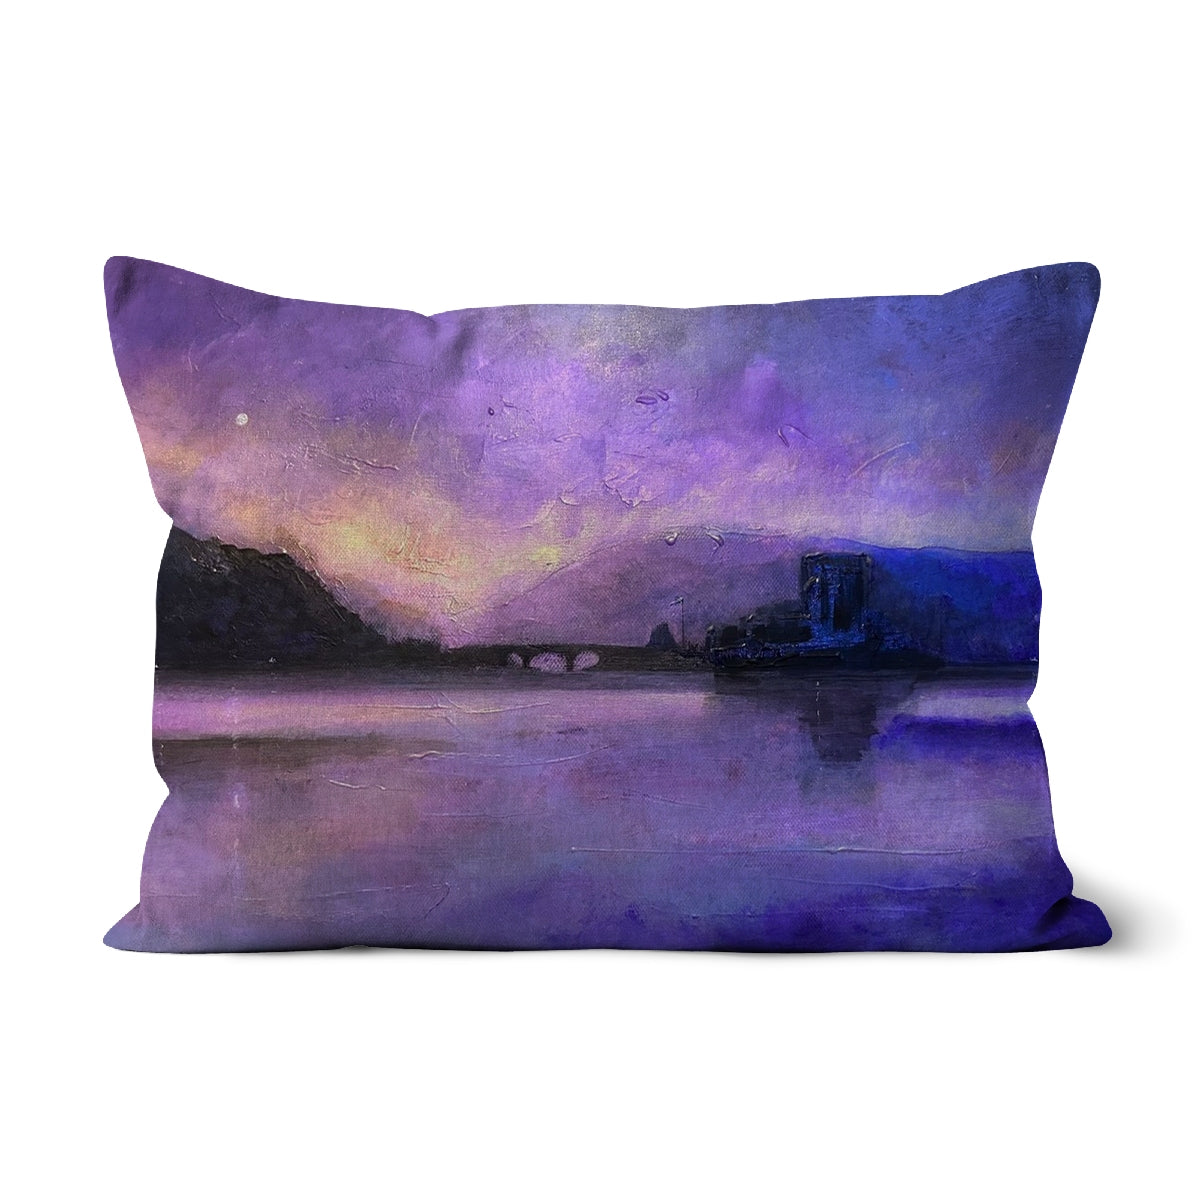 Eilean Donan Castle Moonset Art Gifts Cushion-Cushions-Historic & Iconic Scotland Art Gallery-Faux Suede-19"x13"-Paintings, Prints, Homeware, Art Gifts From Scotland By Scottish Artist Kevin Hunter